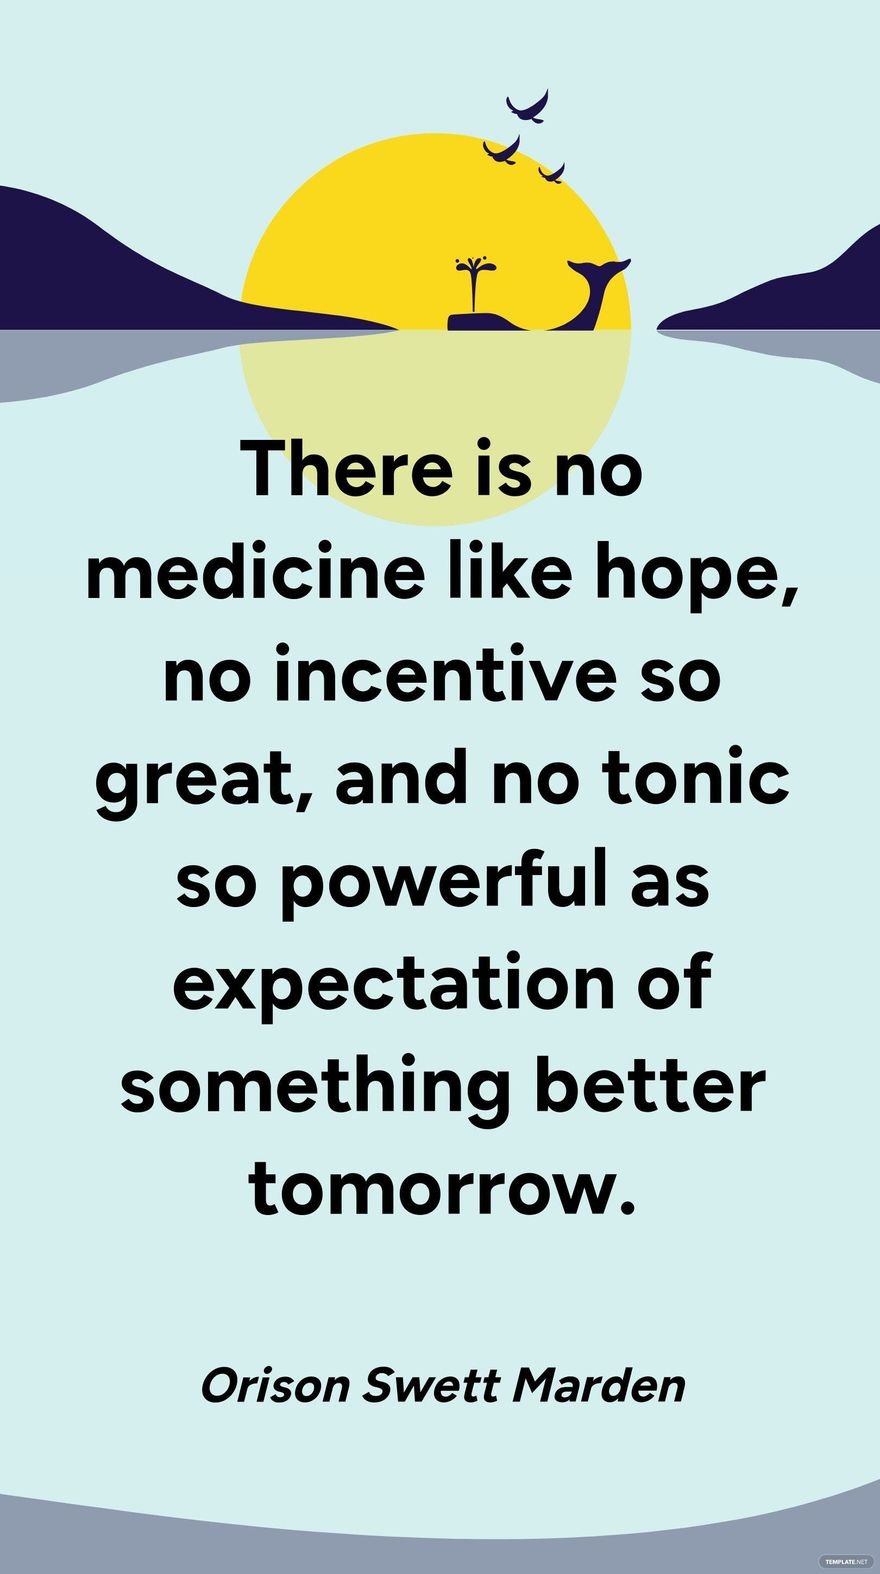 Free Orison Swett Marden - There is no medicine like hope, no incentive so great, and no tonic so powerful as expectation of something better tomorrow. in JPG